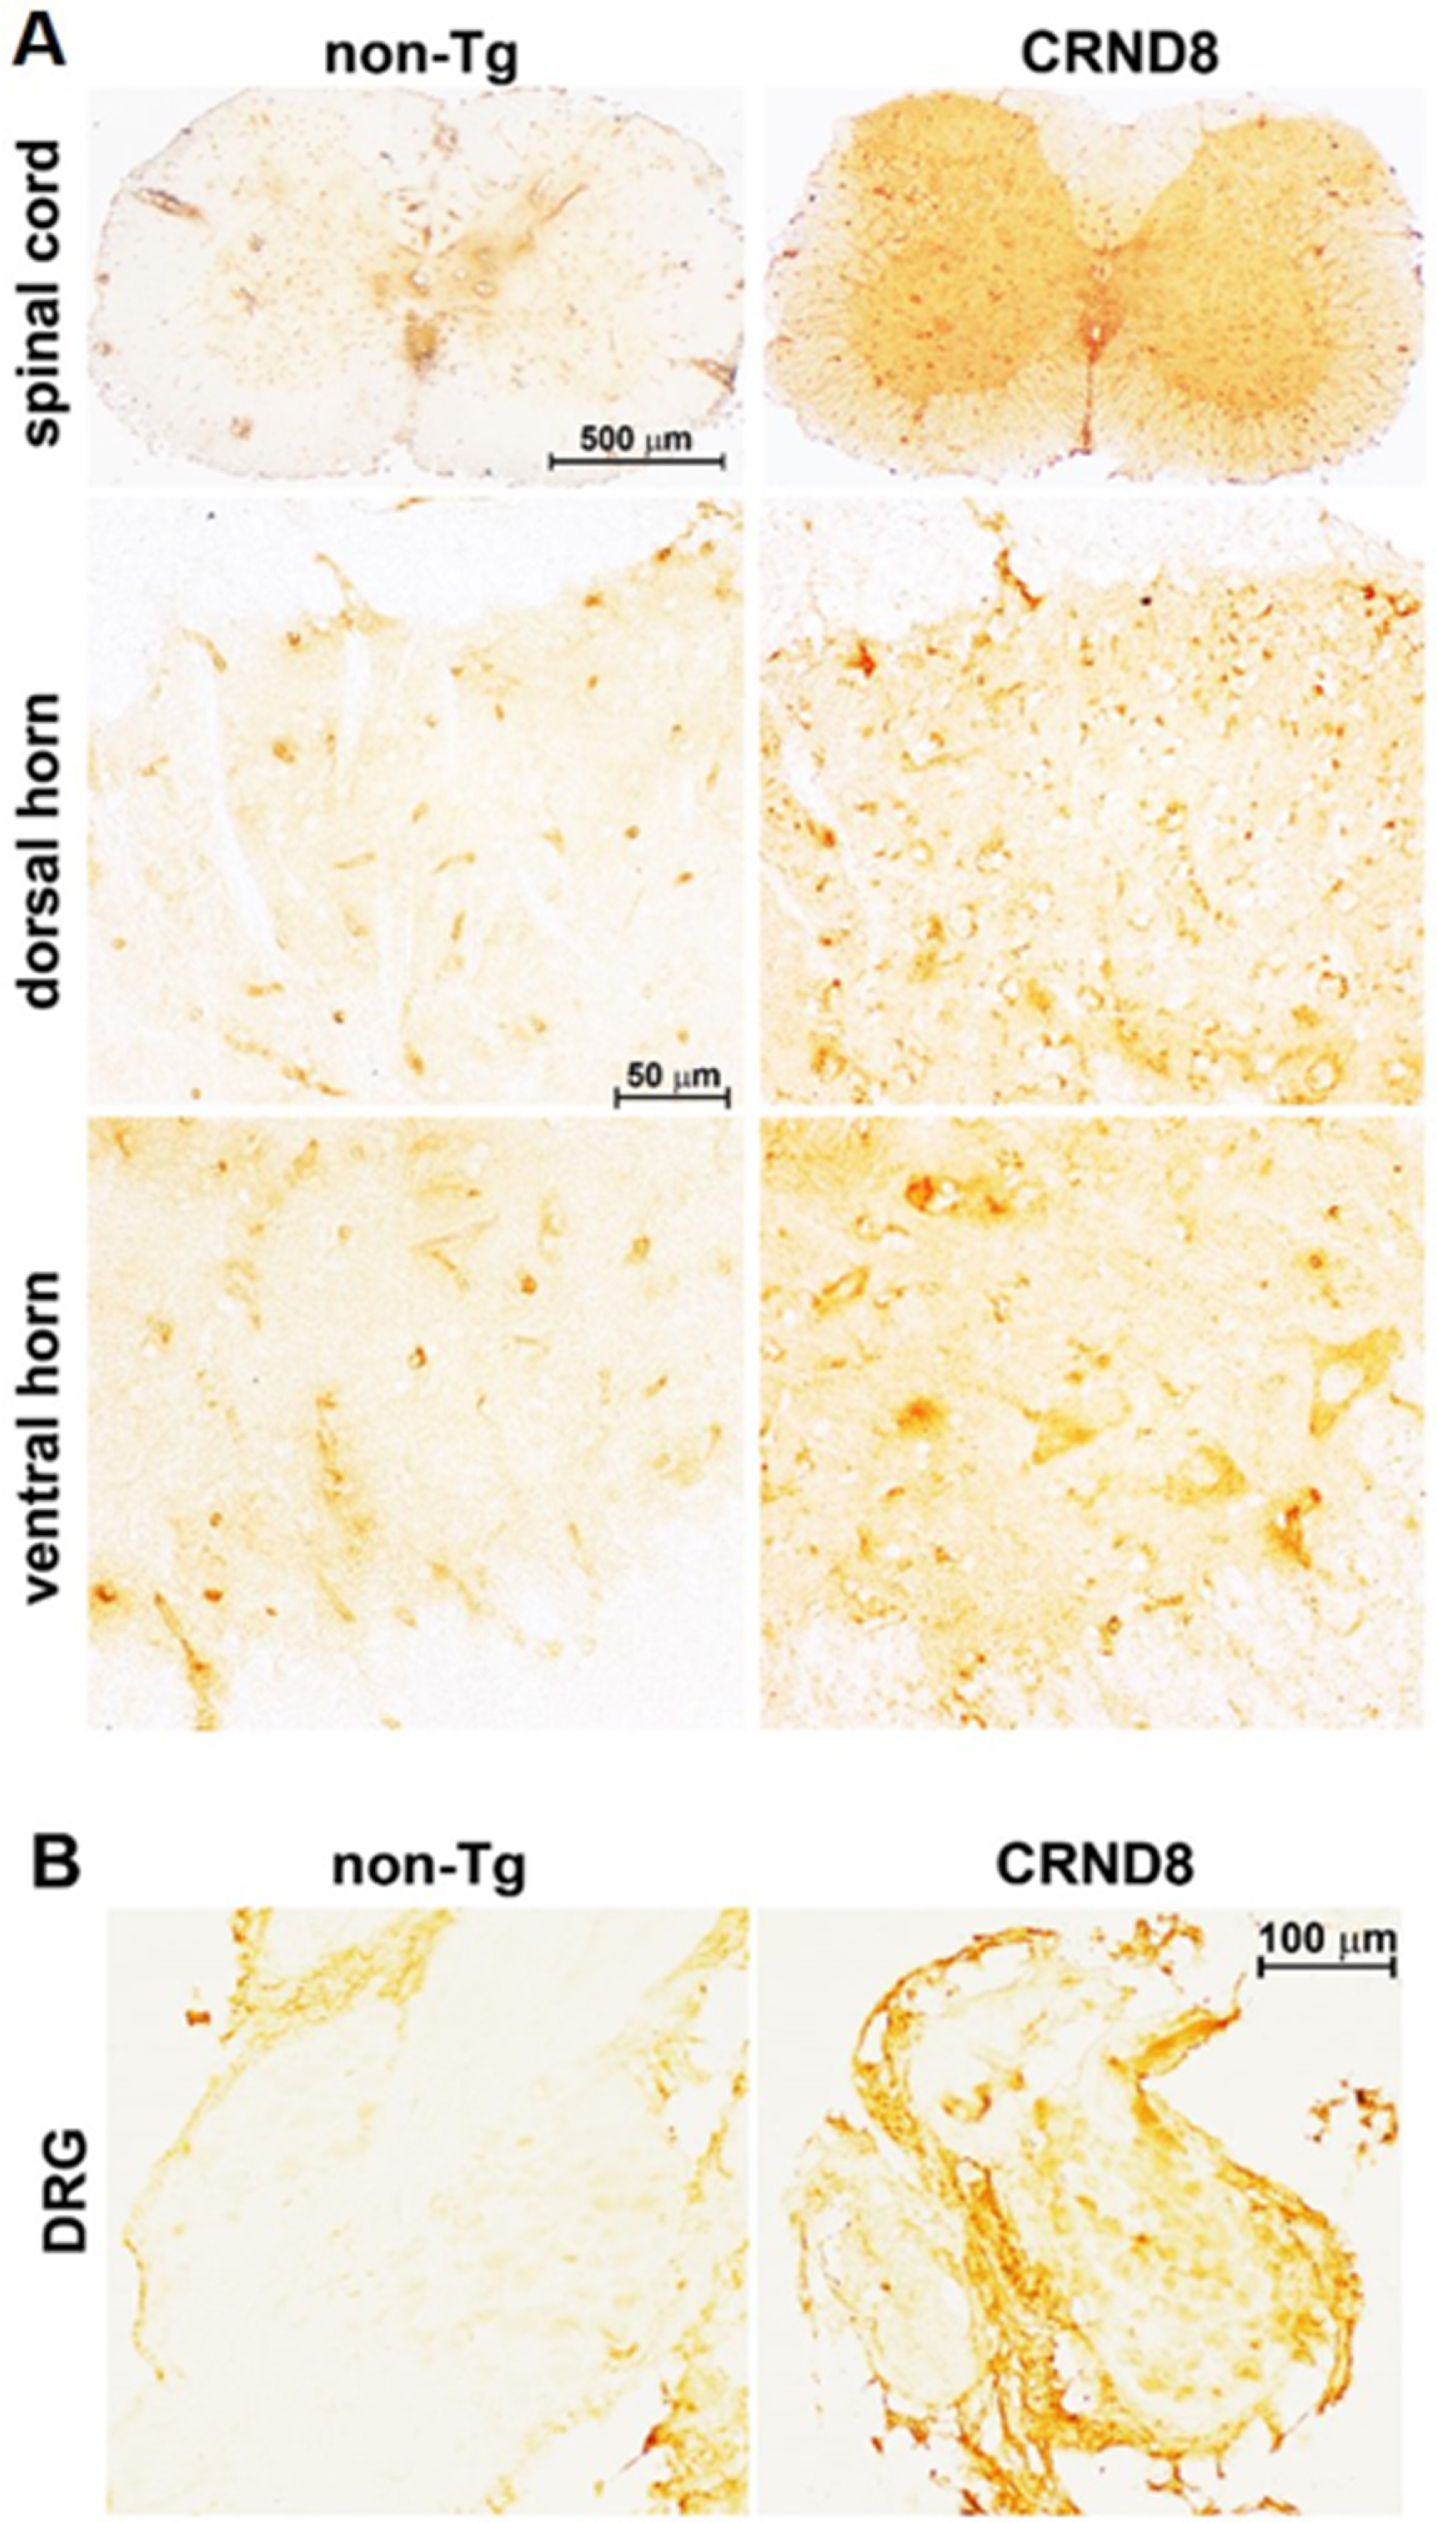 Cellular AβPP/Aβ was visible in the spinal cord and in the DRG of CRND8 mice. Representative AβPP/Aβ immunostaining of CRND8 and non-Tg lumbar spinal cord (A) and DRG (B) sections. AβPP/Aβ immunostaining, by 6E10 antibody, profiled cell bodies in the dorsal horns, in the ventral horns and in the DRG of CRND8 mice. Aβ plaques were not found.